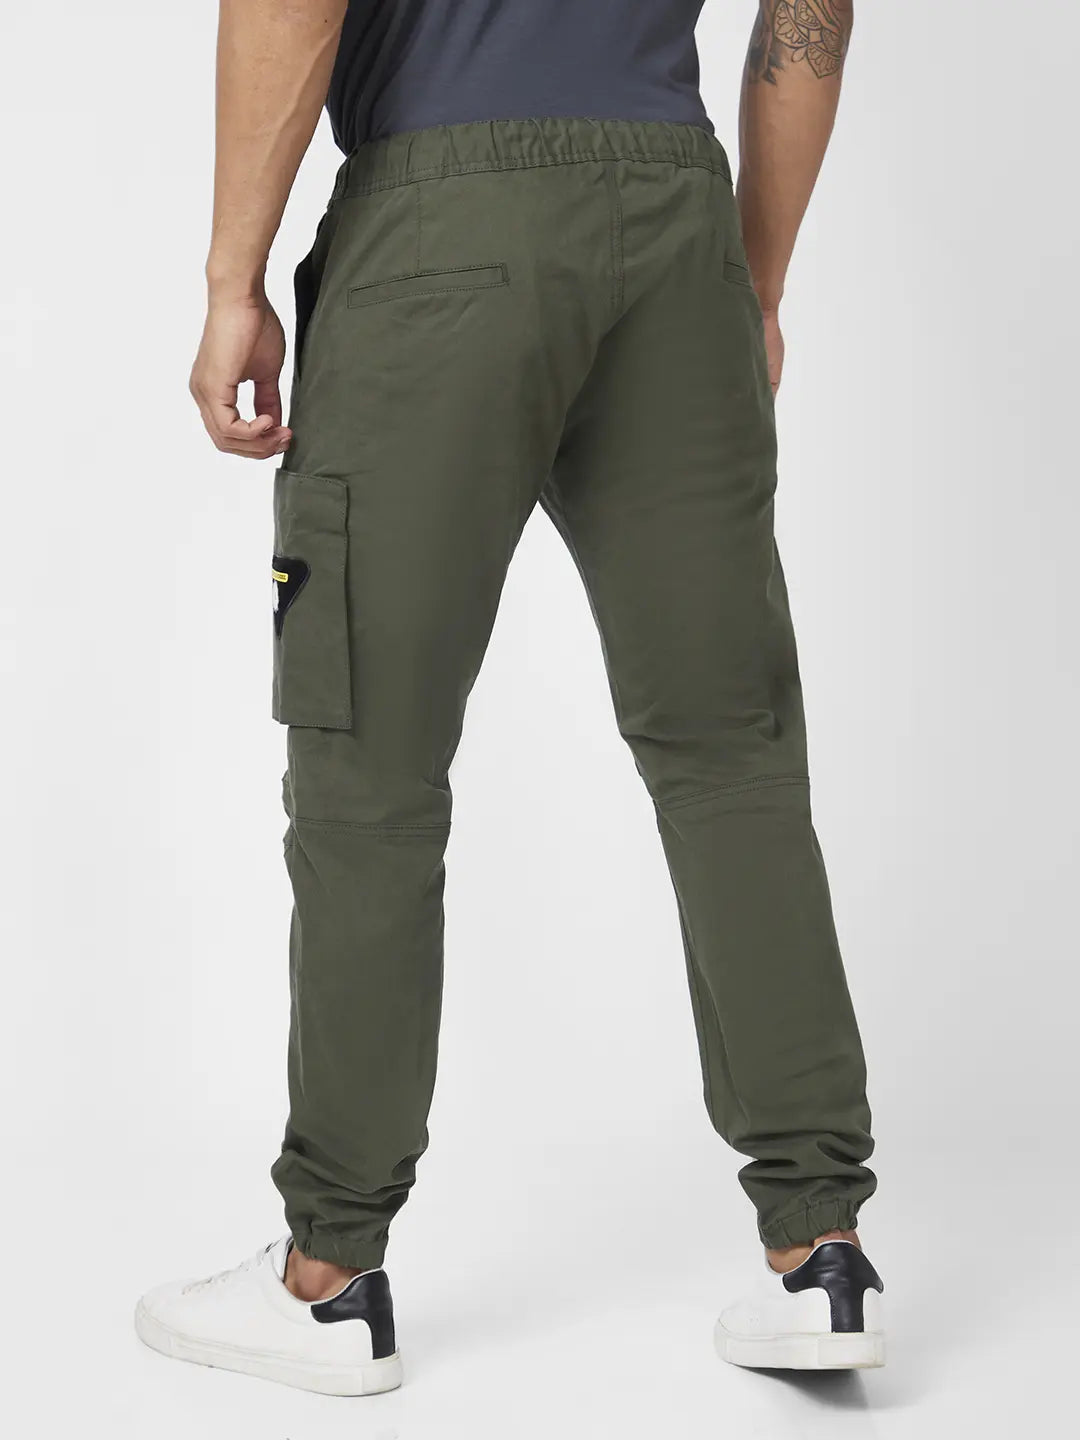 Spykar Men Rifle Green Cotton Joggers Fit Ankle Length Mid Rise Cargo Pant